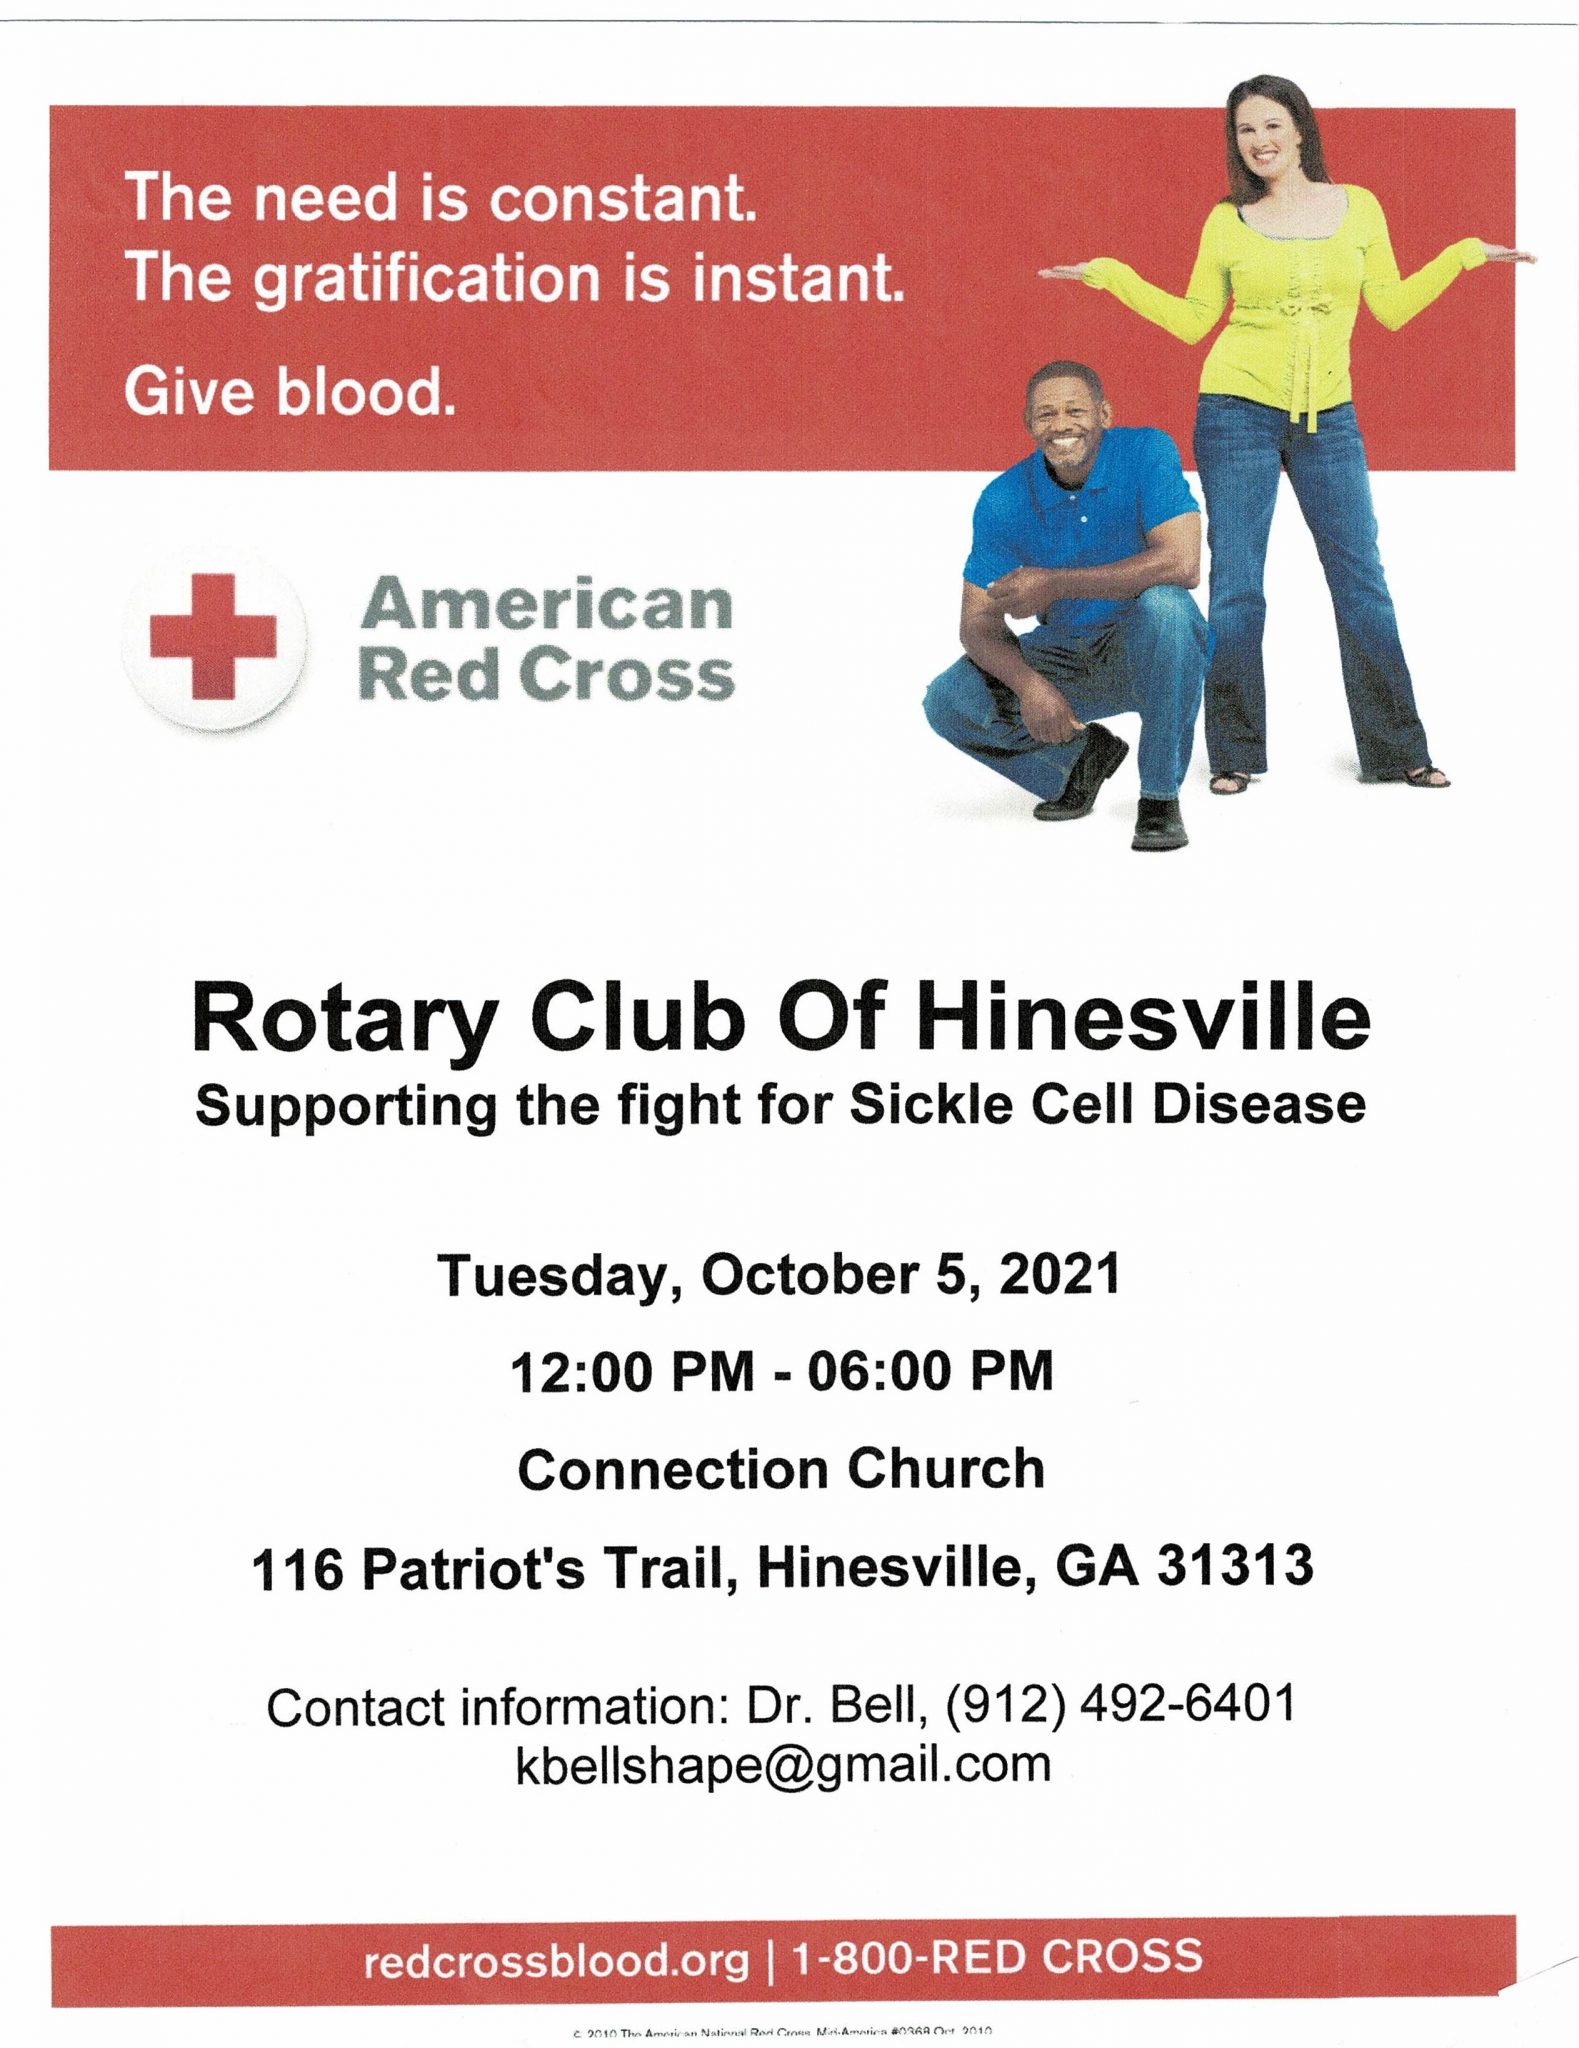 Rotary Club of Hinesville Blood Drive